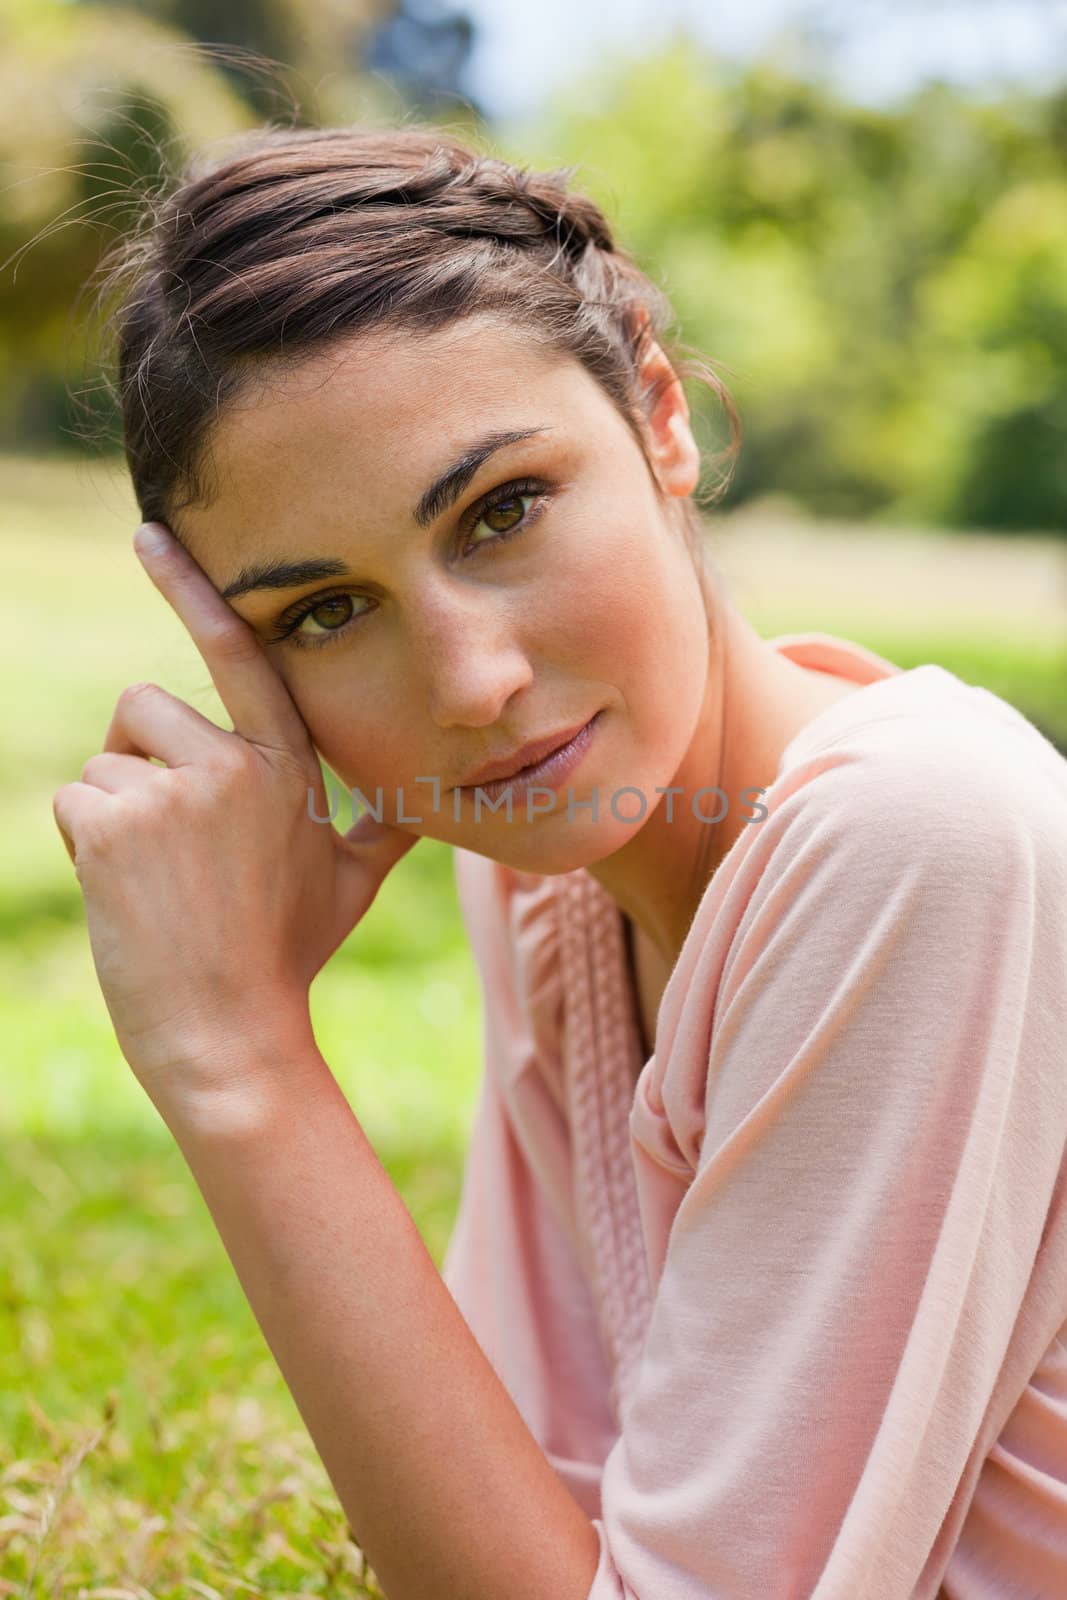 Woman with a serious expression tilting her head against her fingers as she lays on front in the grass